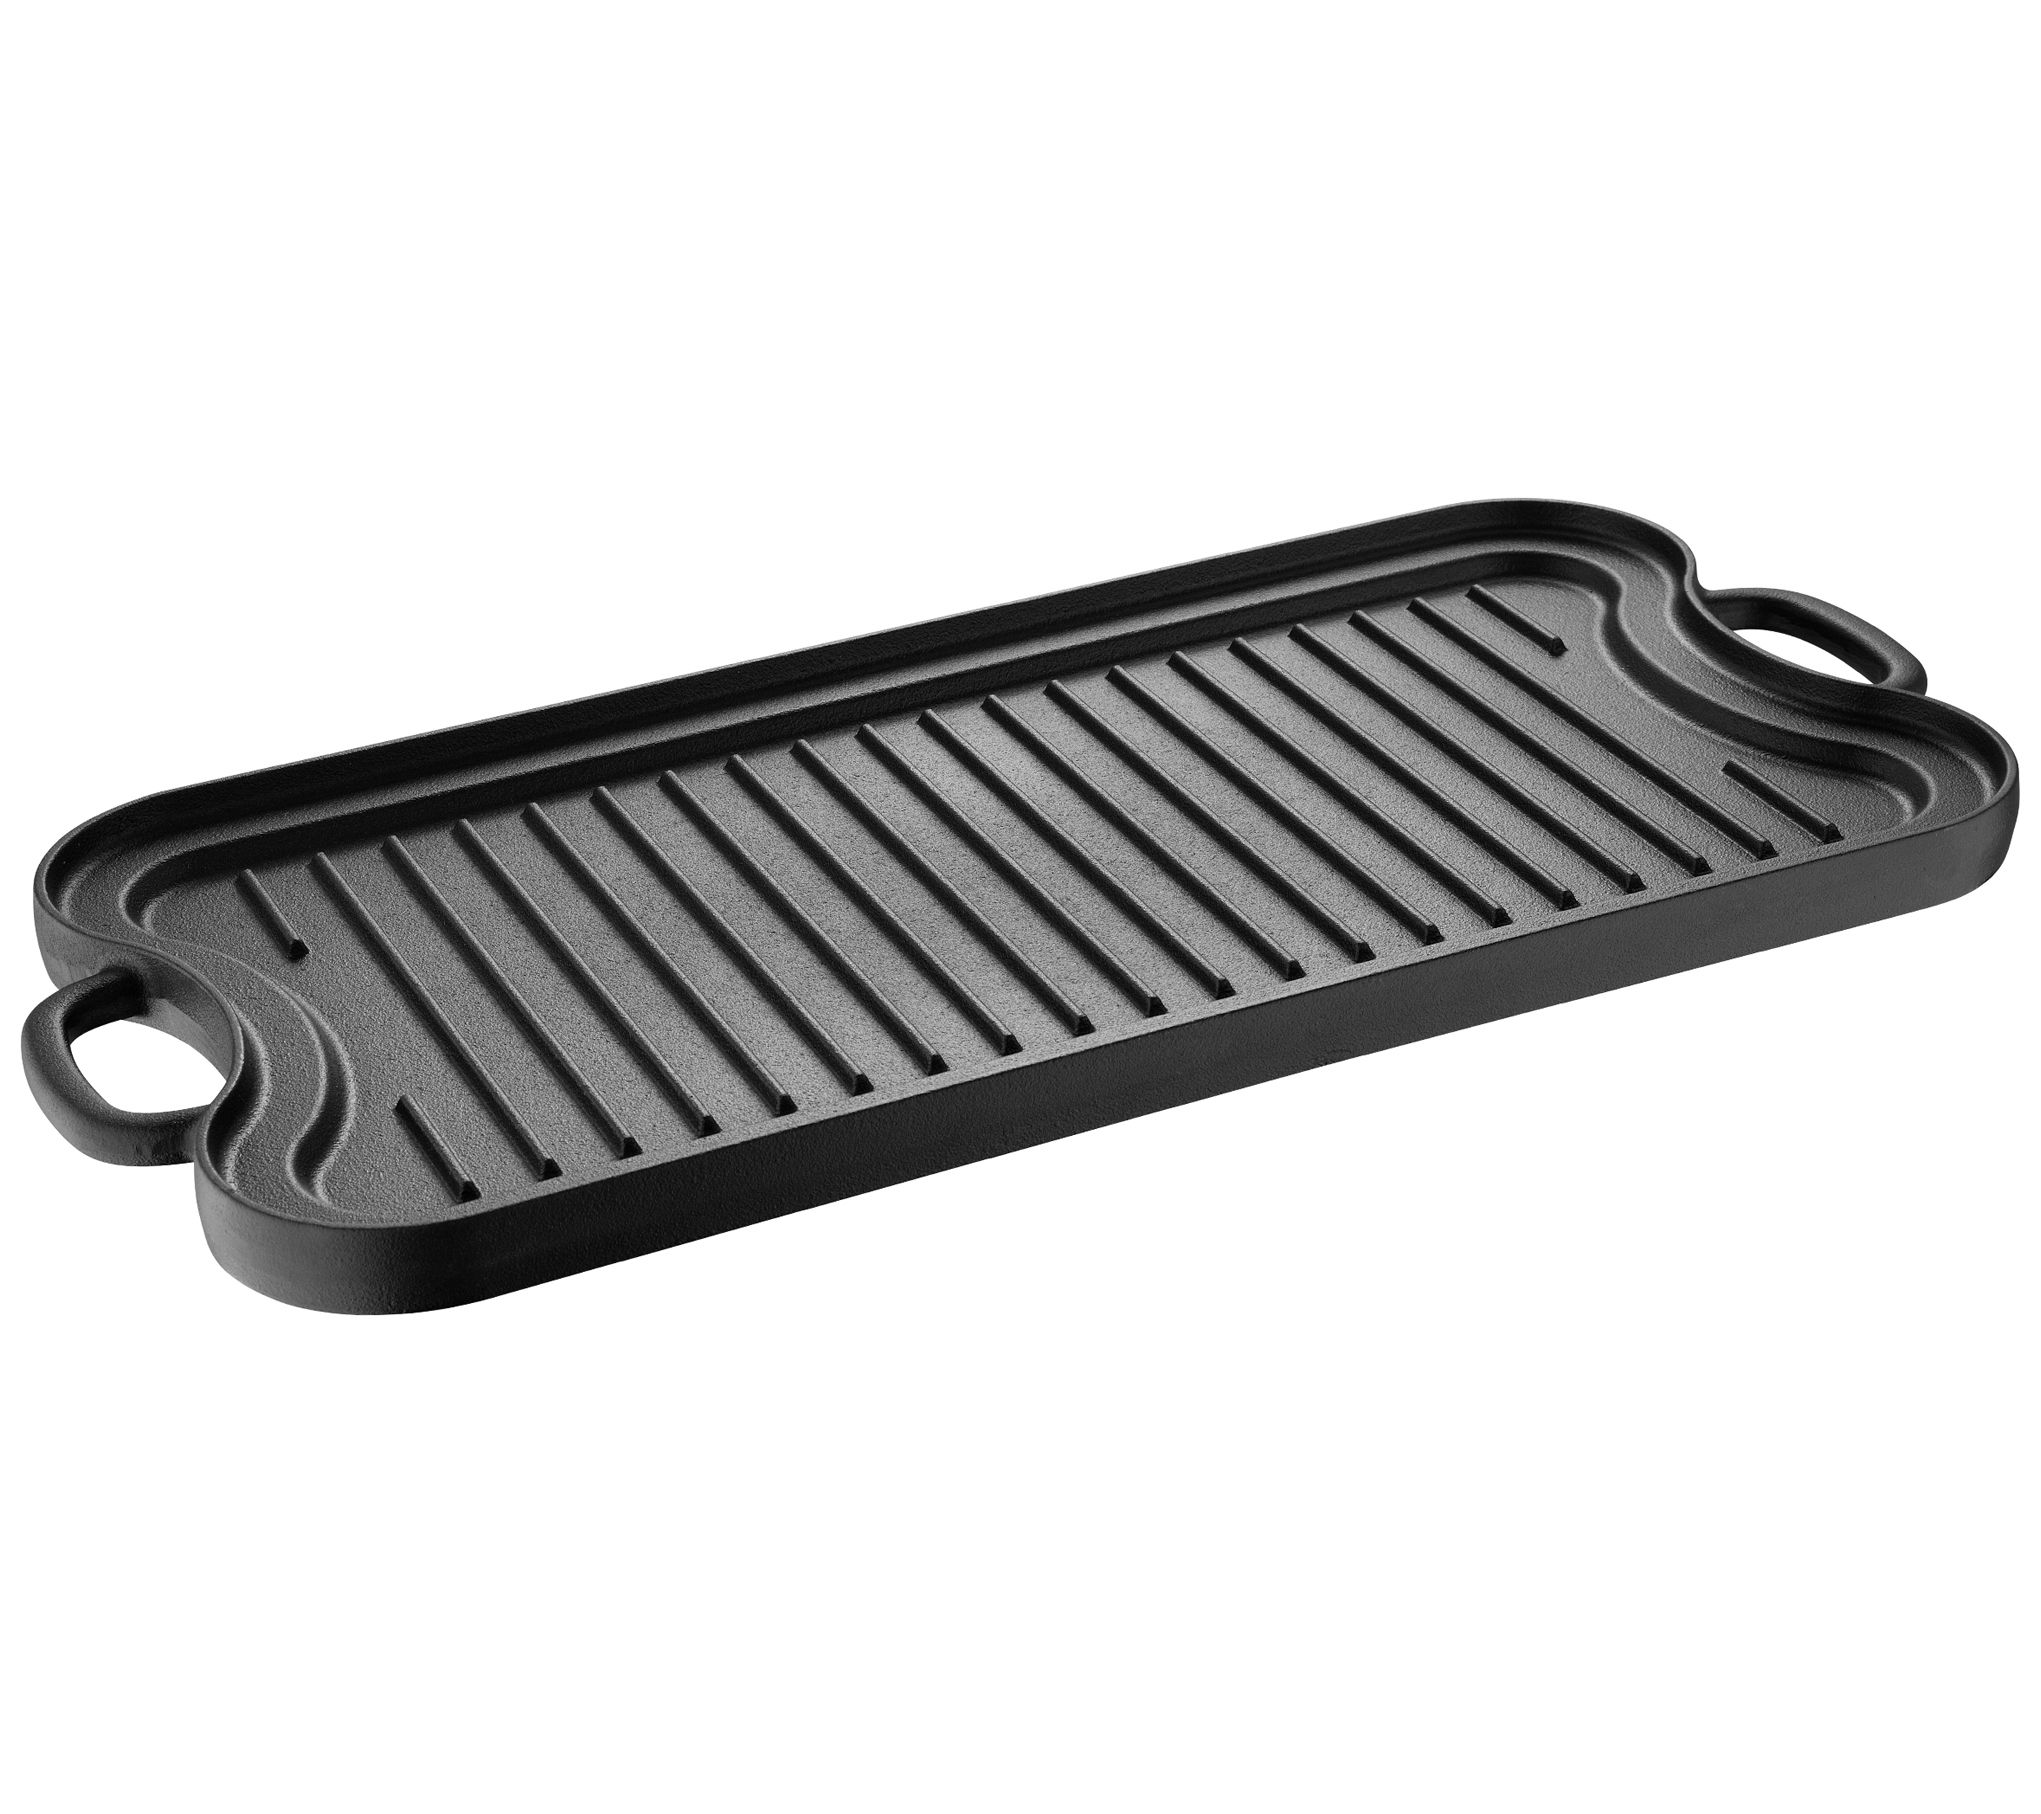 19 x 9.5 Inch Seasoned Cast Iron Reversible Grill/Griddle